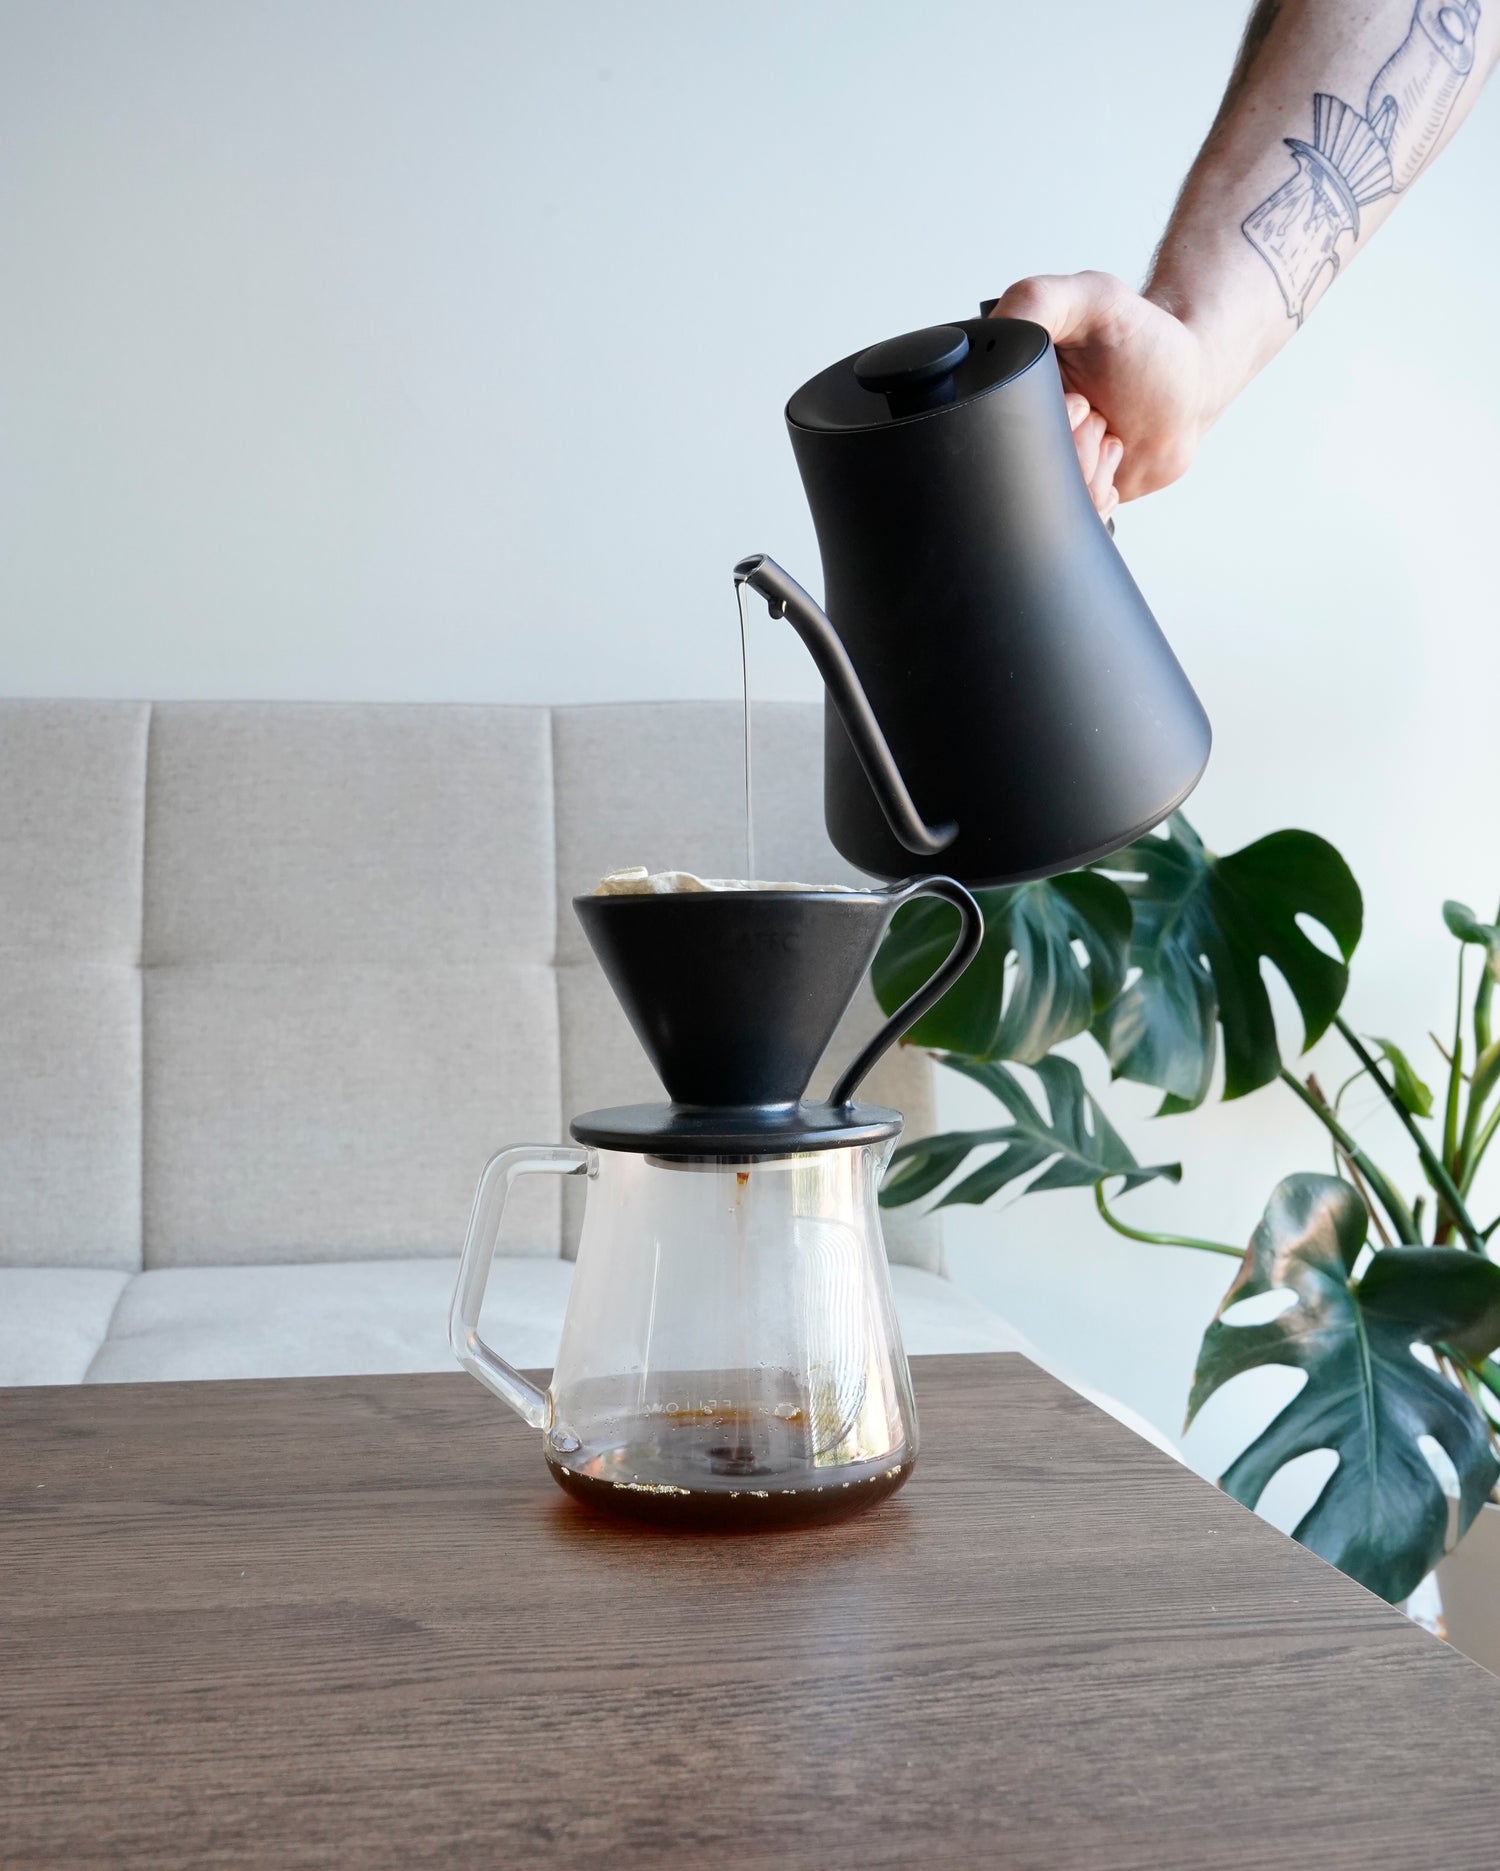 Coffee Made Basic - Basic Barista Australia Melbourne Barista Basics - Welcome to the world of pour over coffee